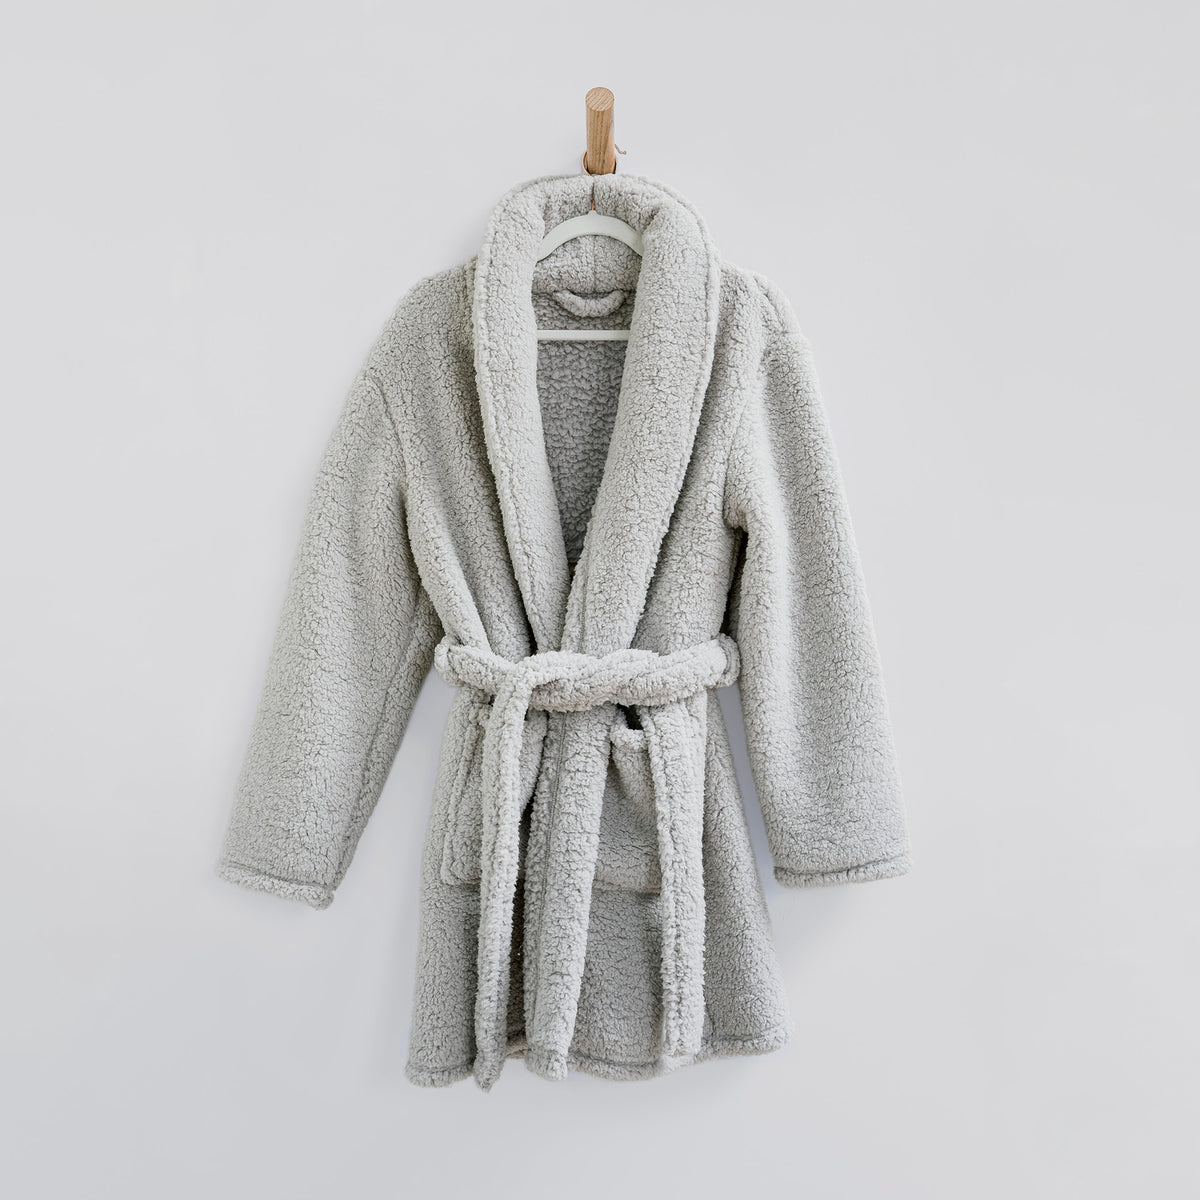 Image of a fluffy gray Sunday Morning Robe hanging from a wooden rod on a white wall